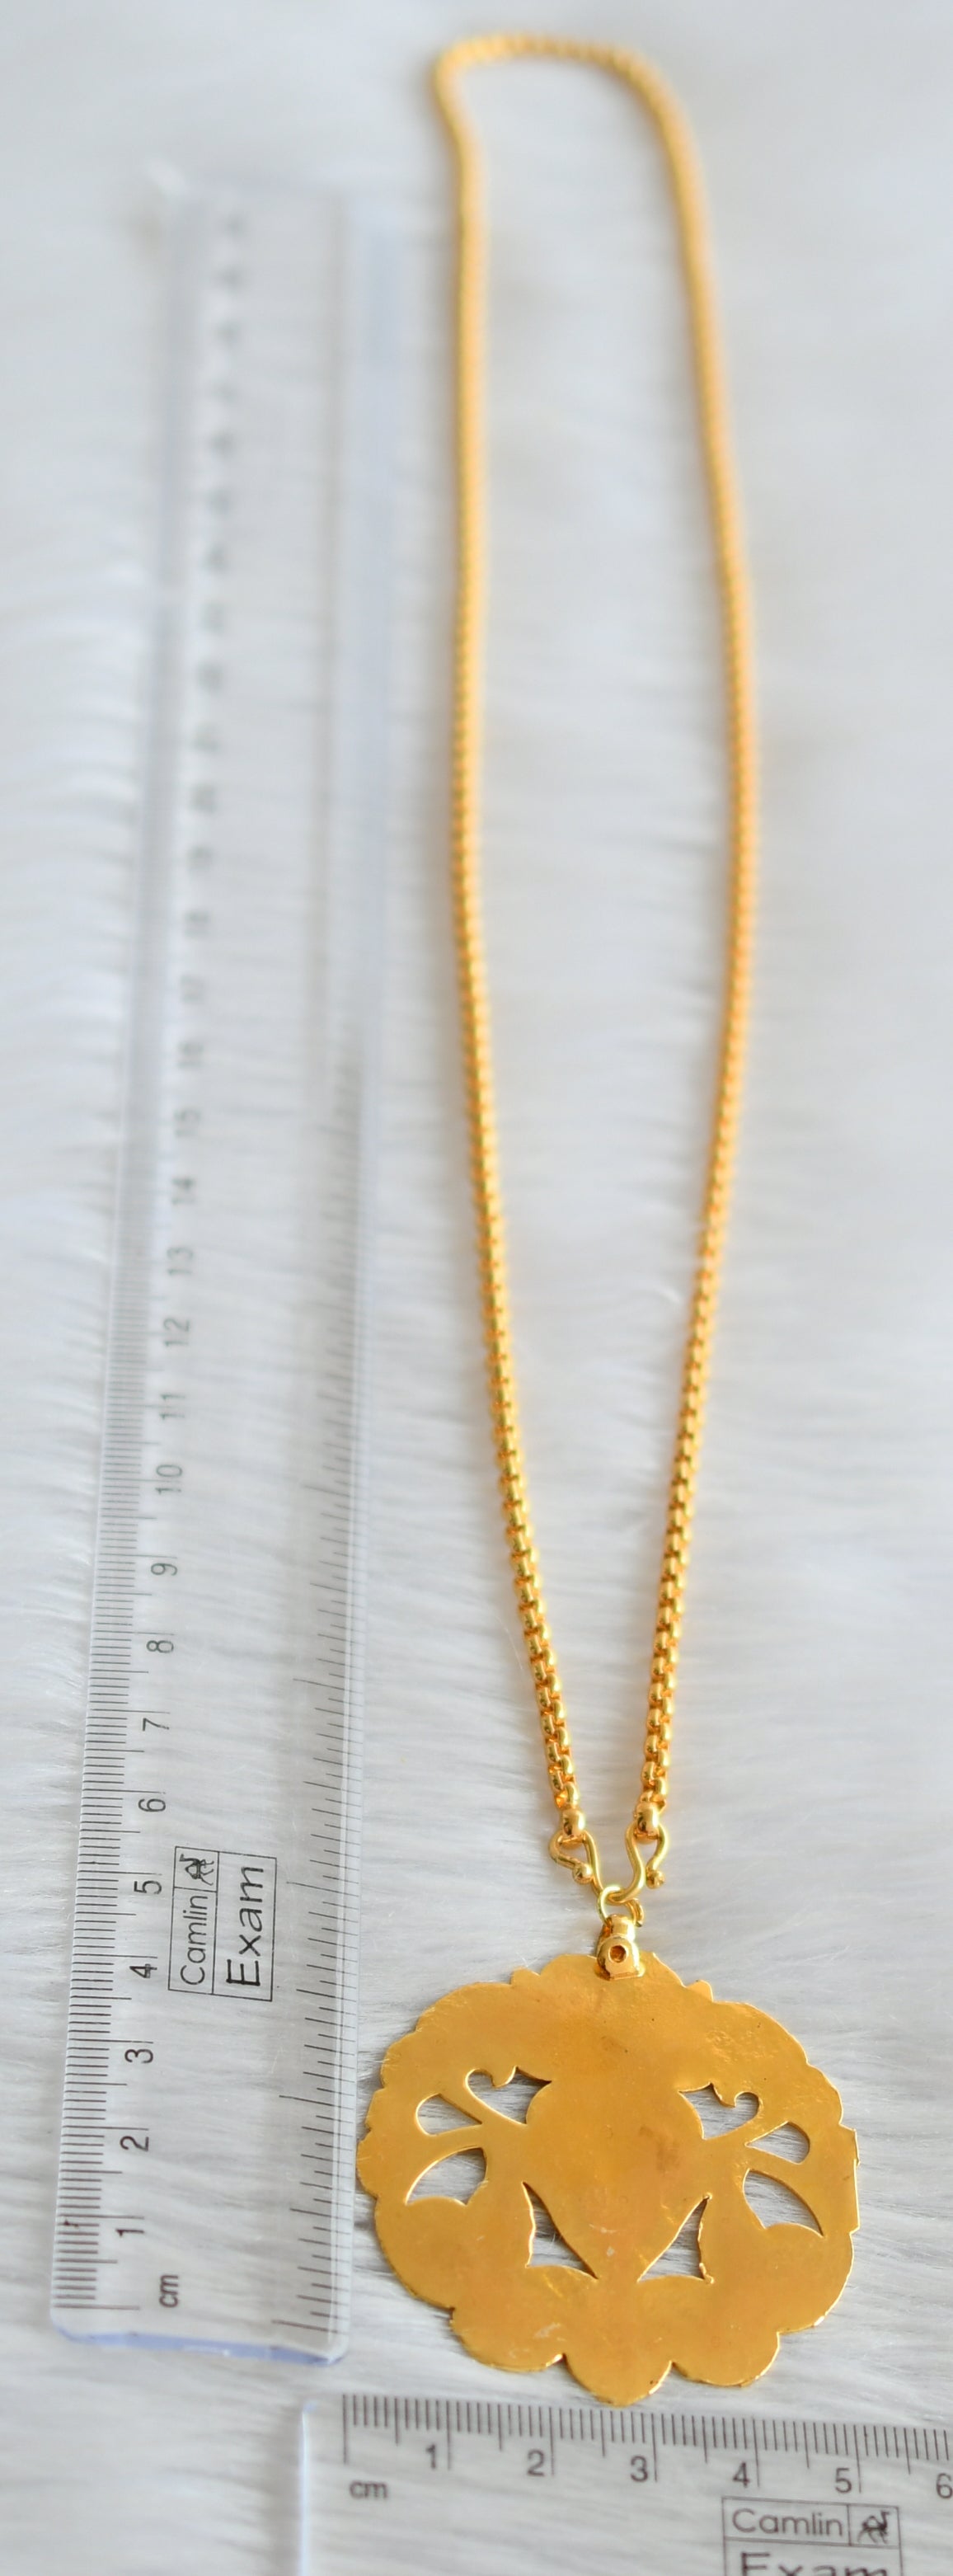 Gold tone 24 inches chain with round pendant dj-43978